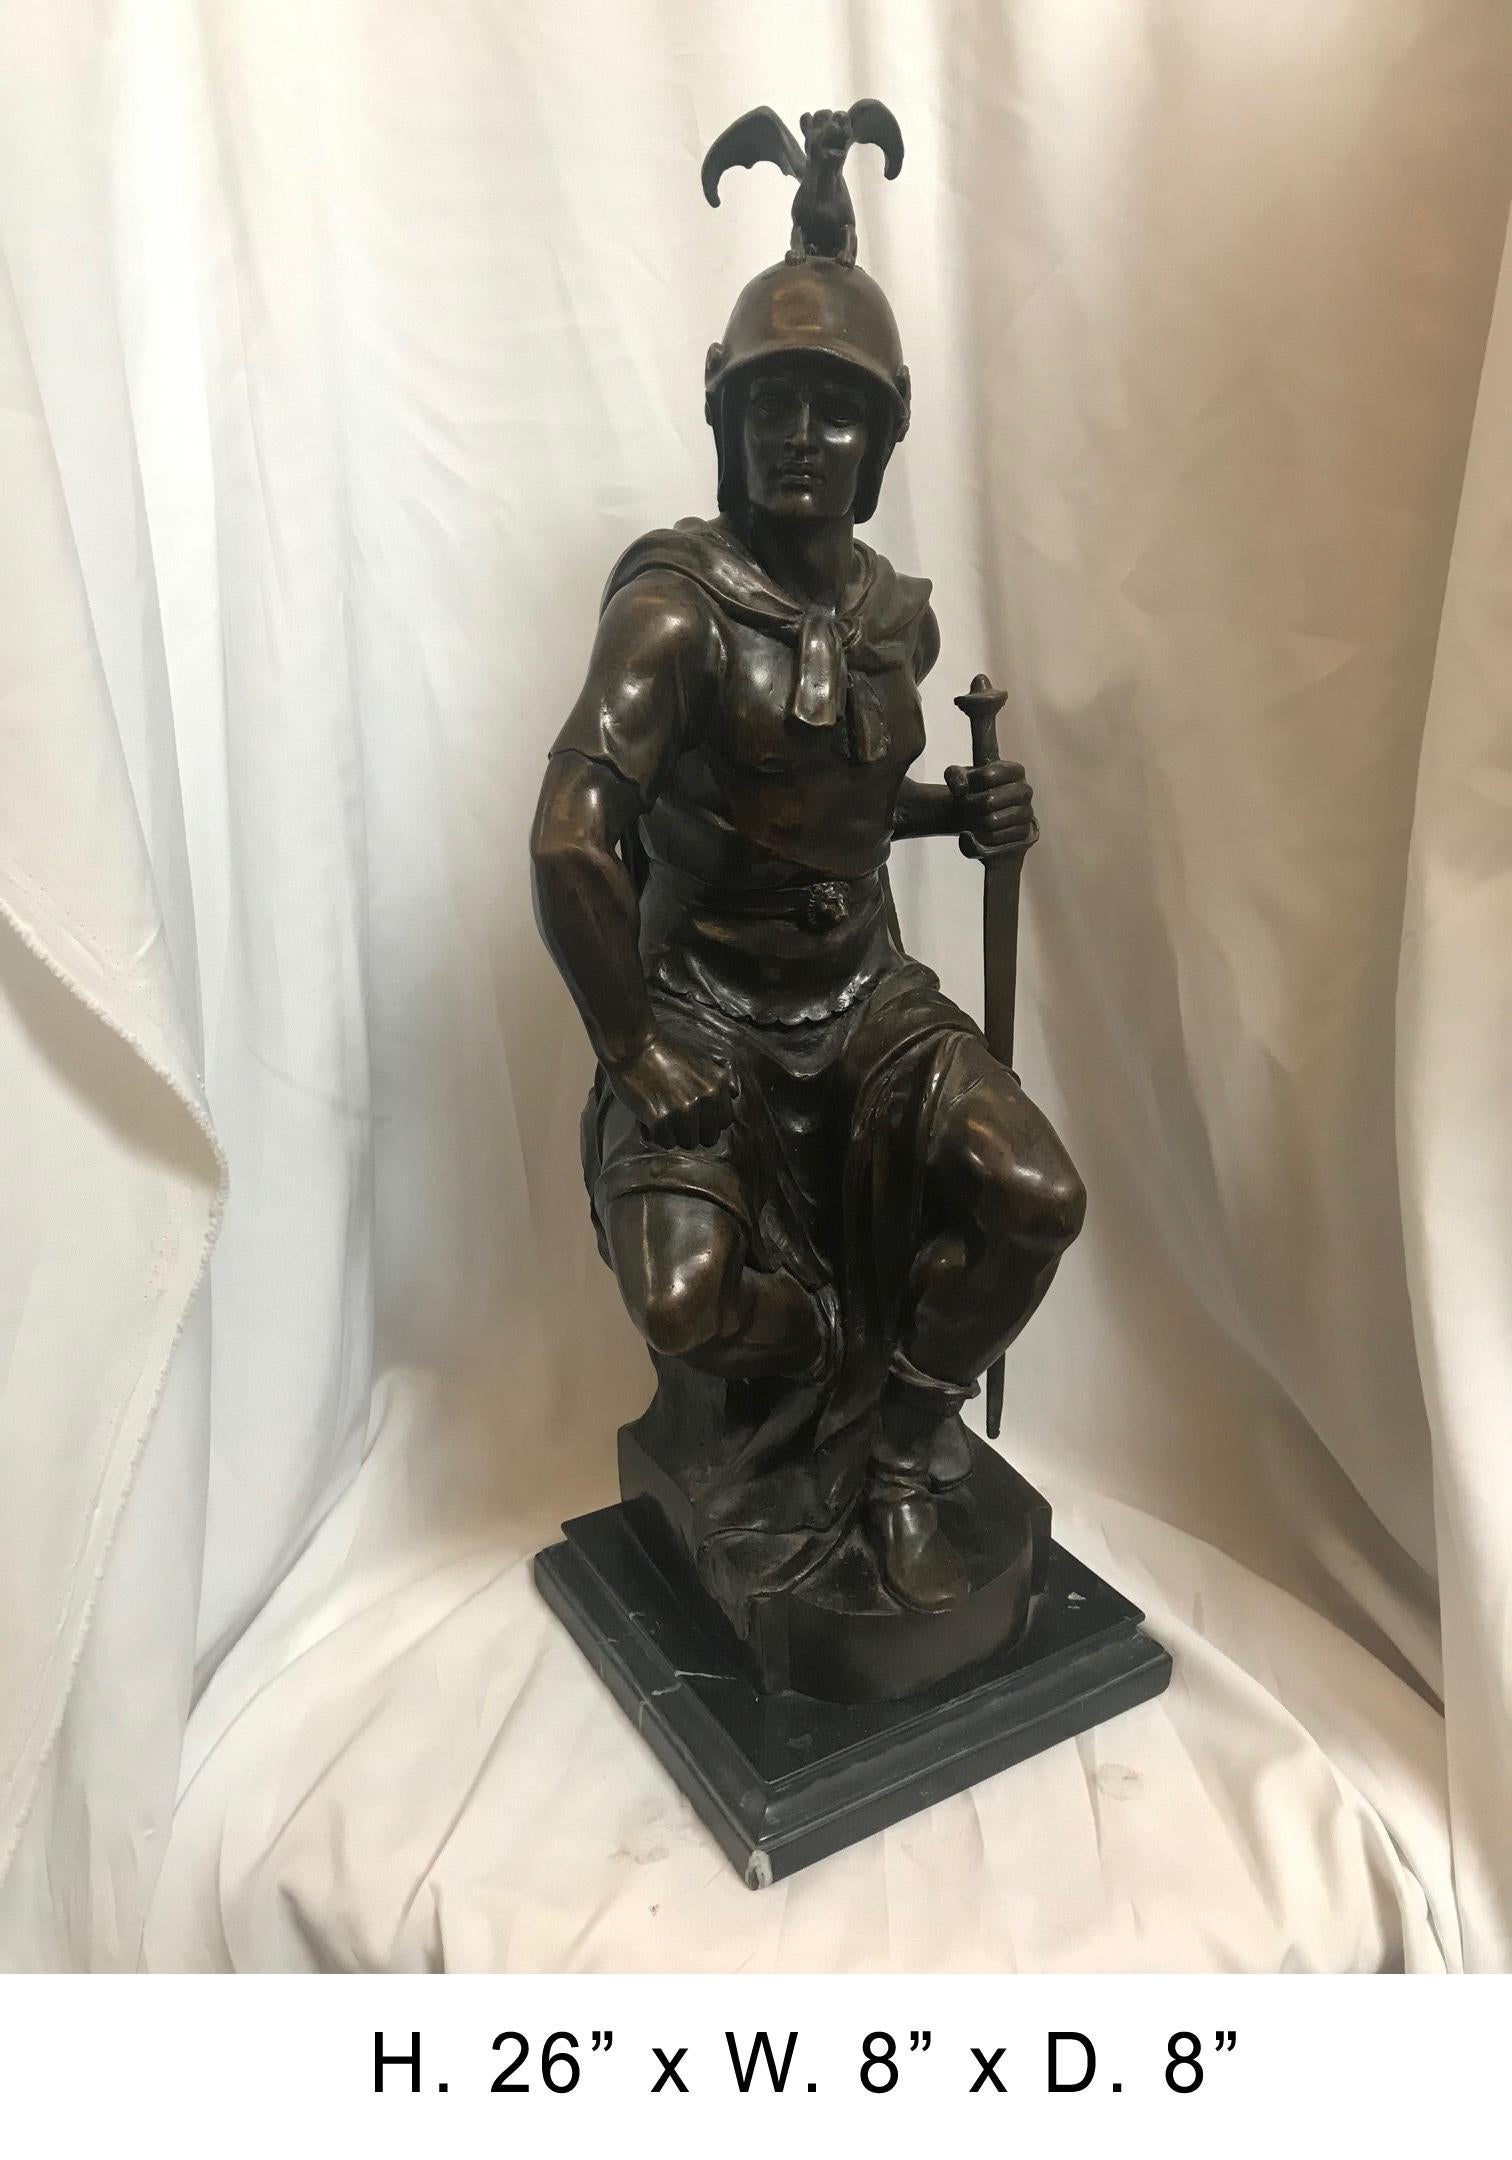 Imposing continental patinated bronze seated Roman soldier on a black marble base.
Mid-20th century
Beautiful impression on the face and great attention to detail
Measures: H. 26